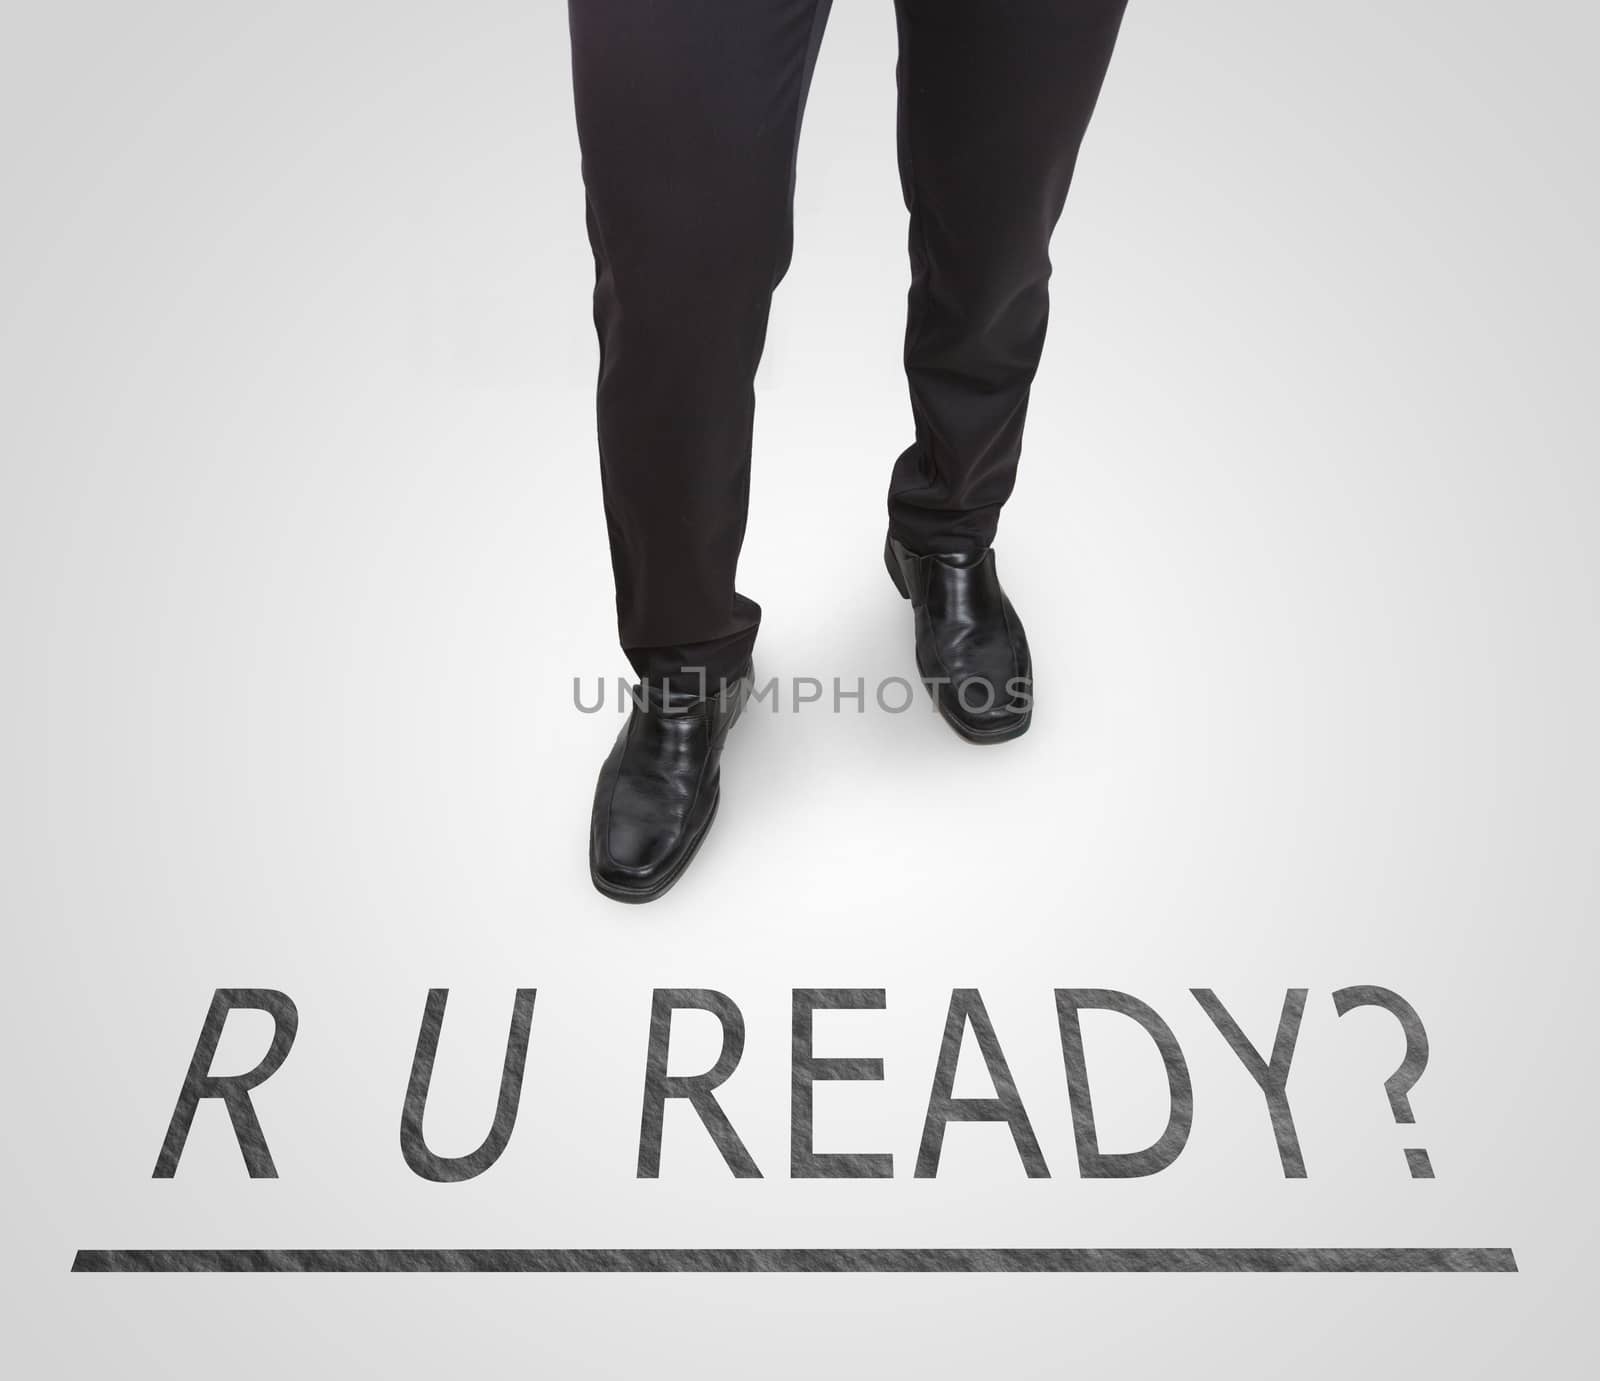 Businessman standing wearing court shoes on ready line. by jayzynism